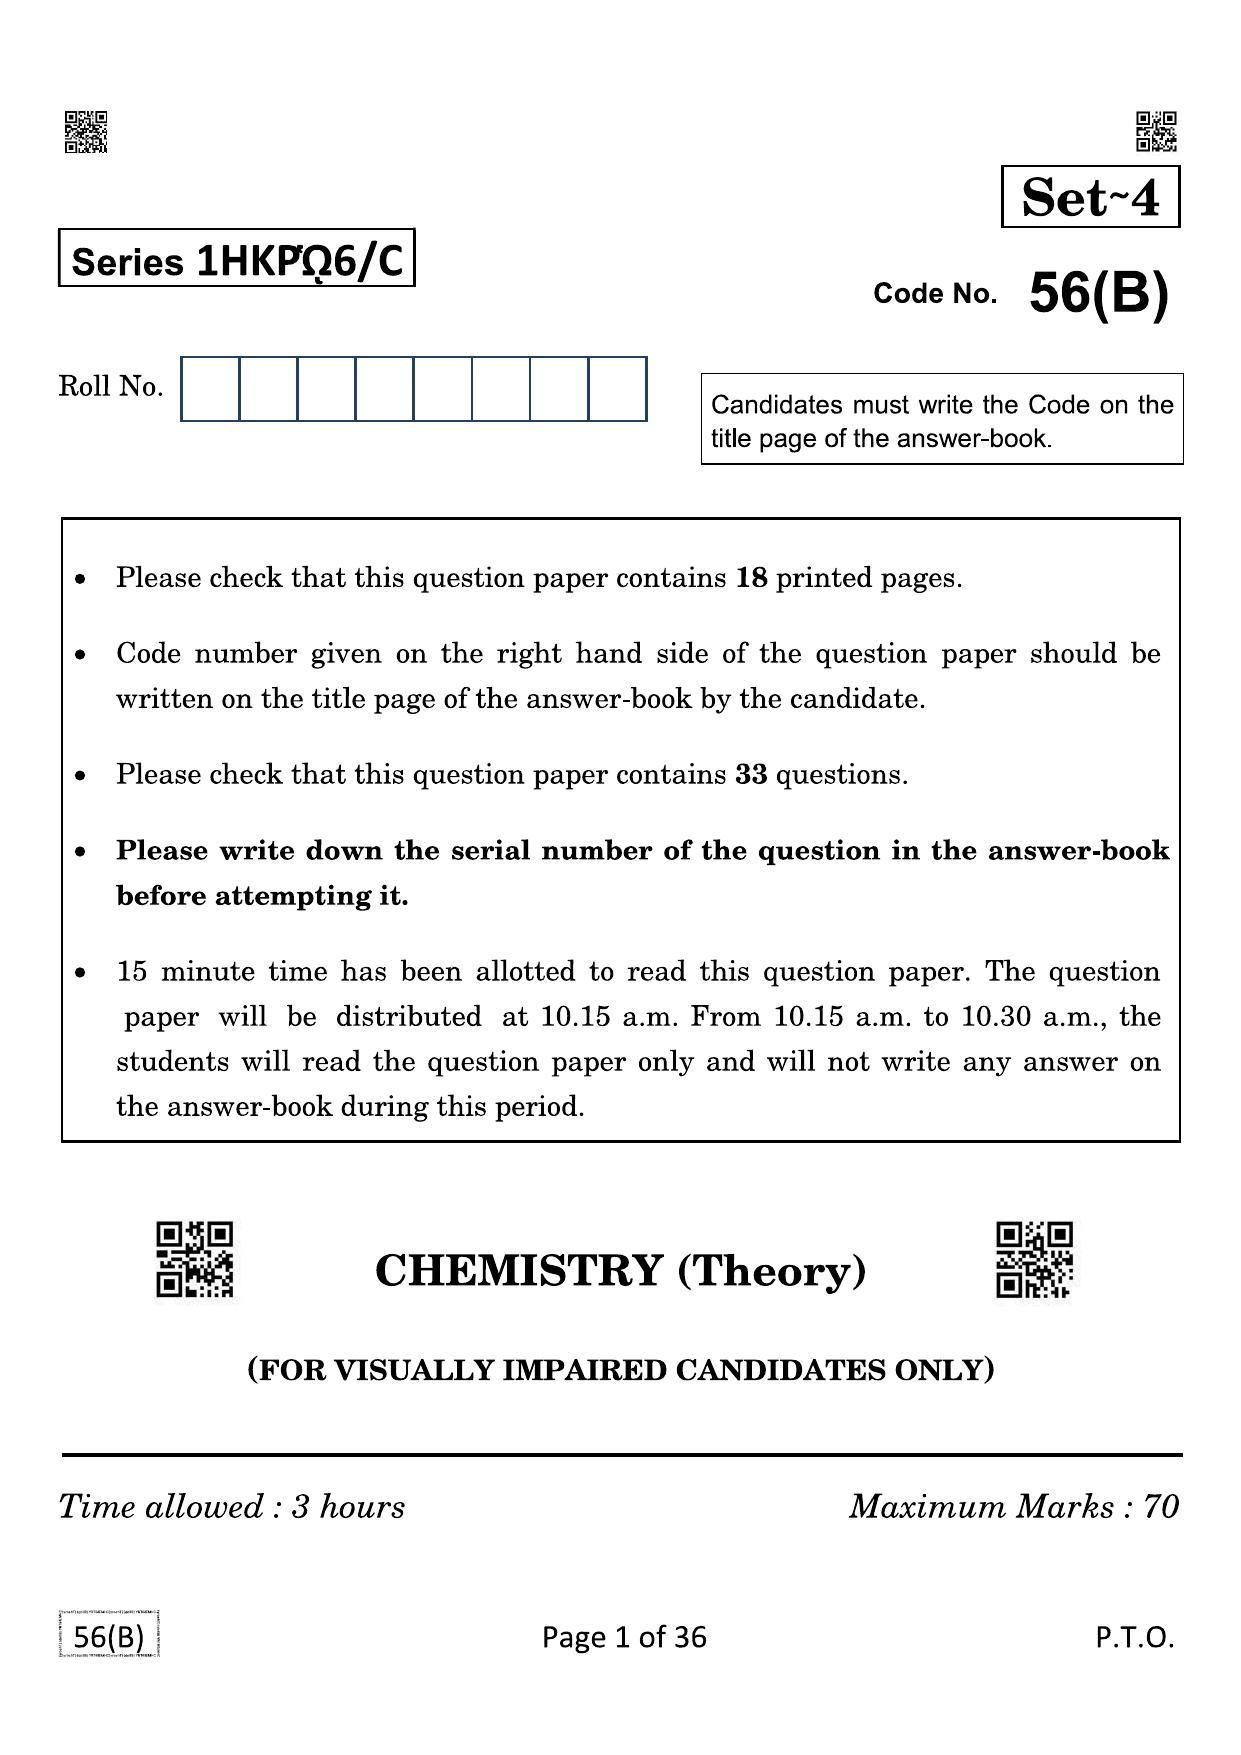 CBSE Class 12 QP_043_CHEMISTRY_FOR_BLIND_CANDIDATES 2021 Compartment Question Paper - Page 1